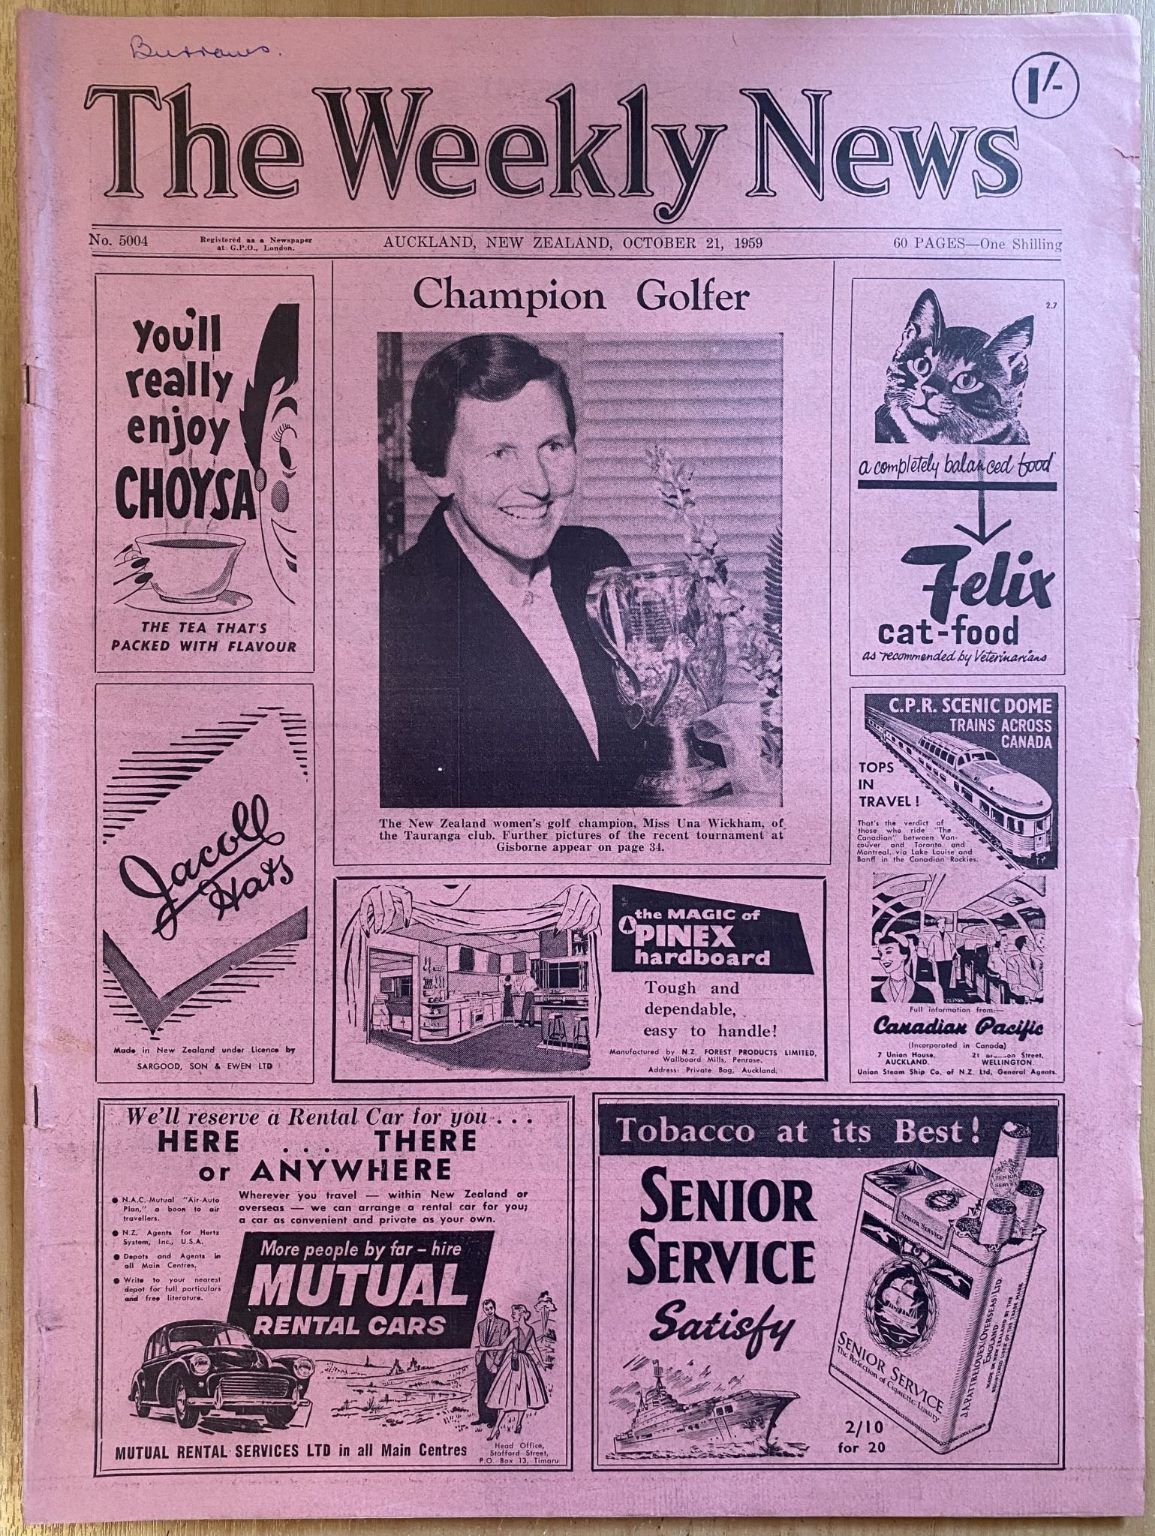 OLD NEWSPAPER: The Weekly News - No. 5004, 21 October 1959